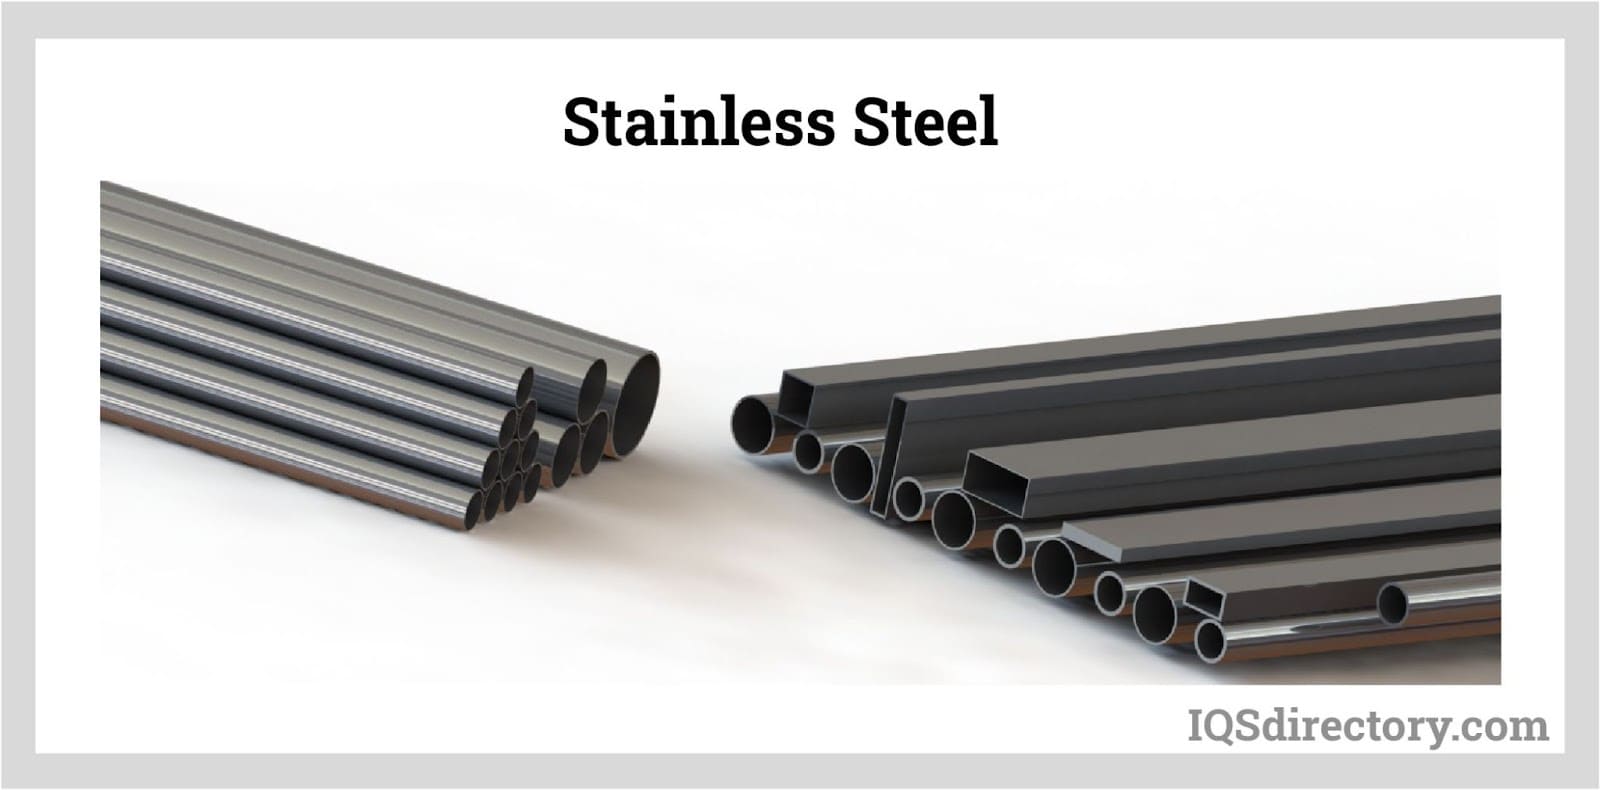 https://www.iqsdirectory.com/articles/stainless-steel/stainless-steel-grades/stainless-steel.jpg